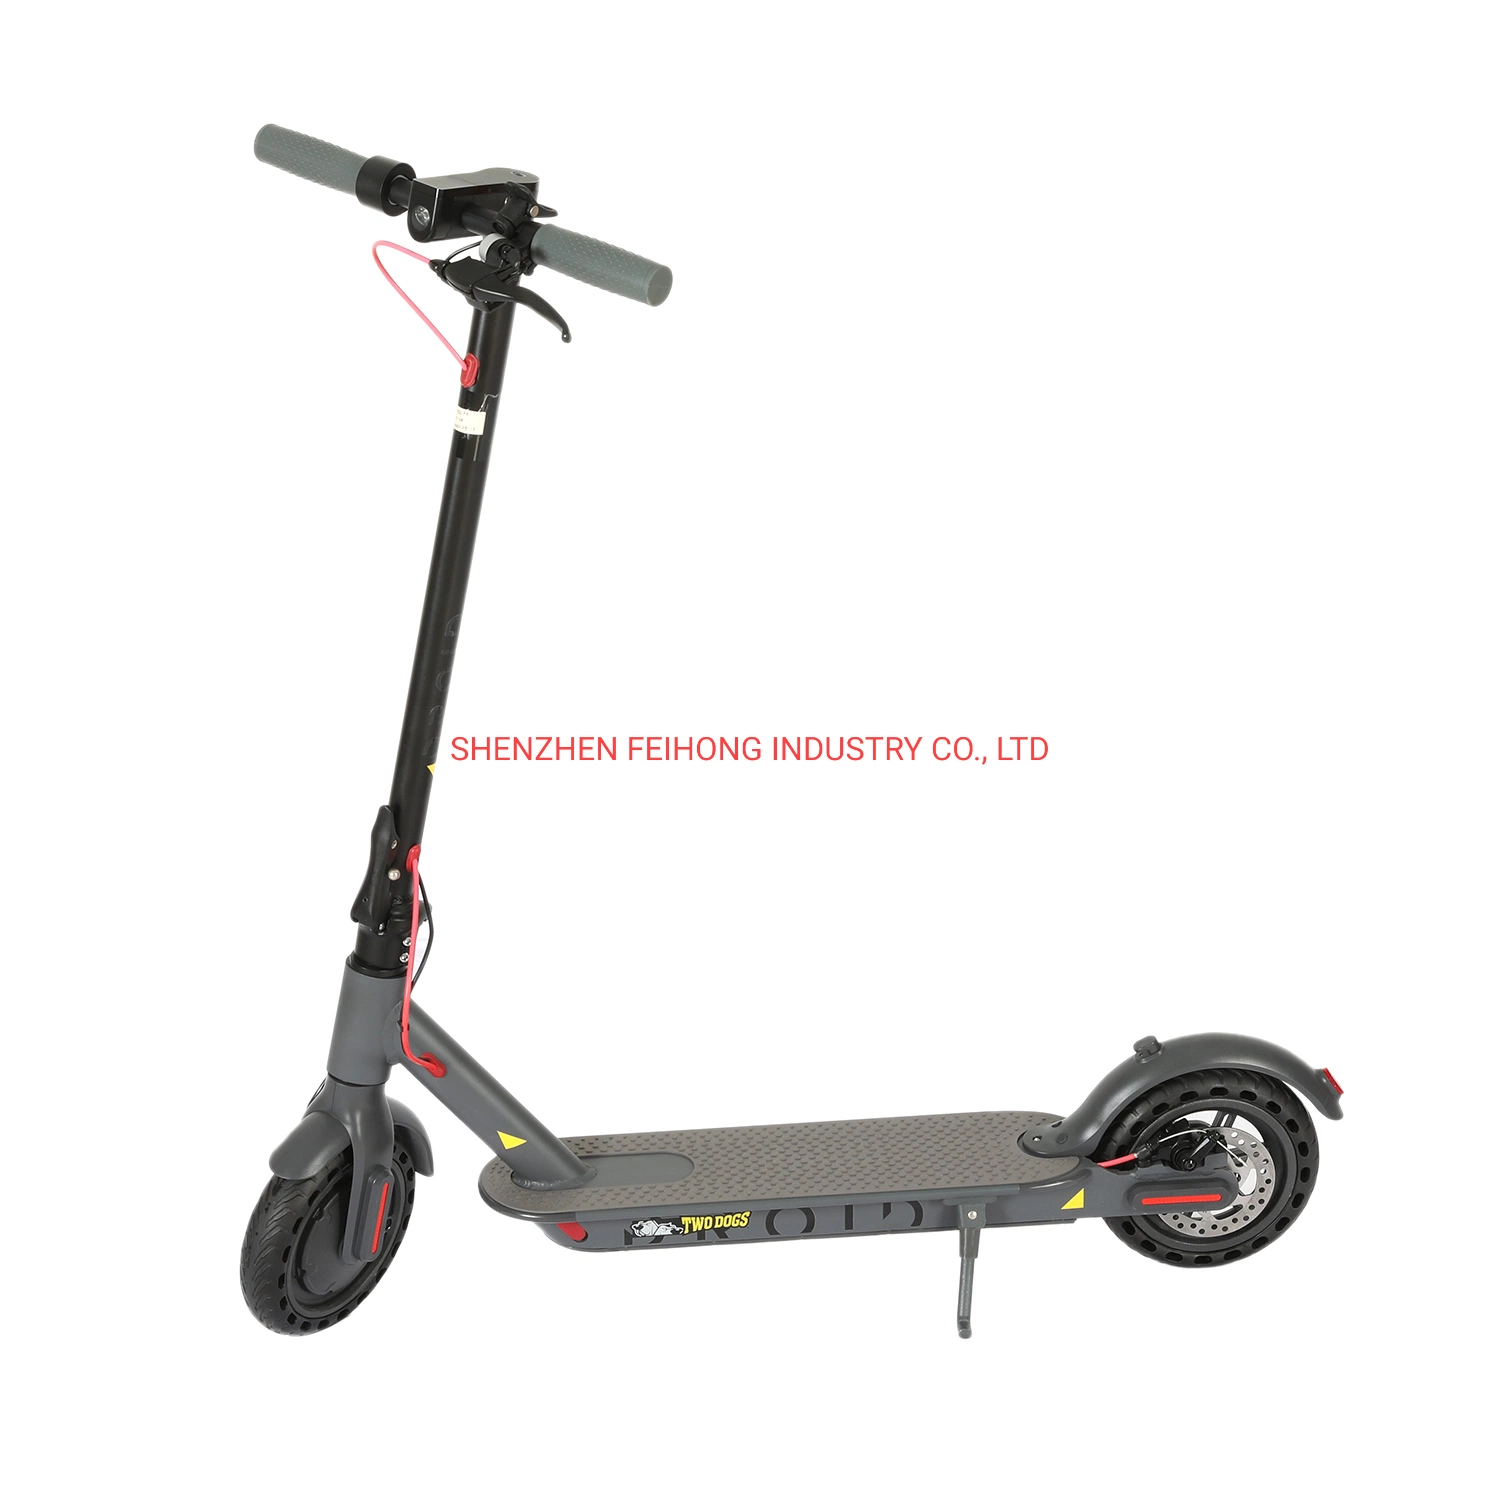 Adult Motorcycle Electric Scooter Bicycle Electric Bike Electric Motorcycle Scooter Motor Scooter Ecoolpa 350W Motor Electric Kick Scooters Eks-08